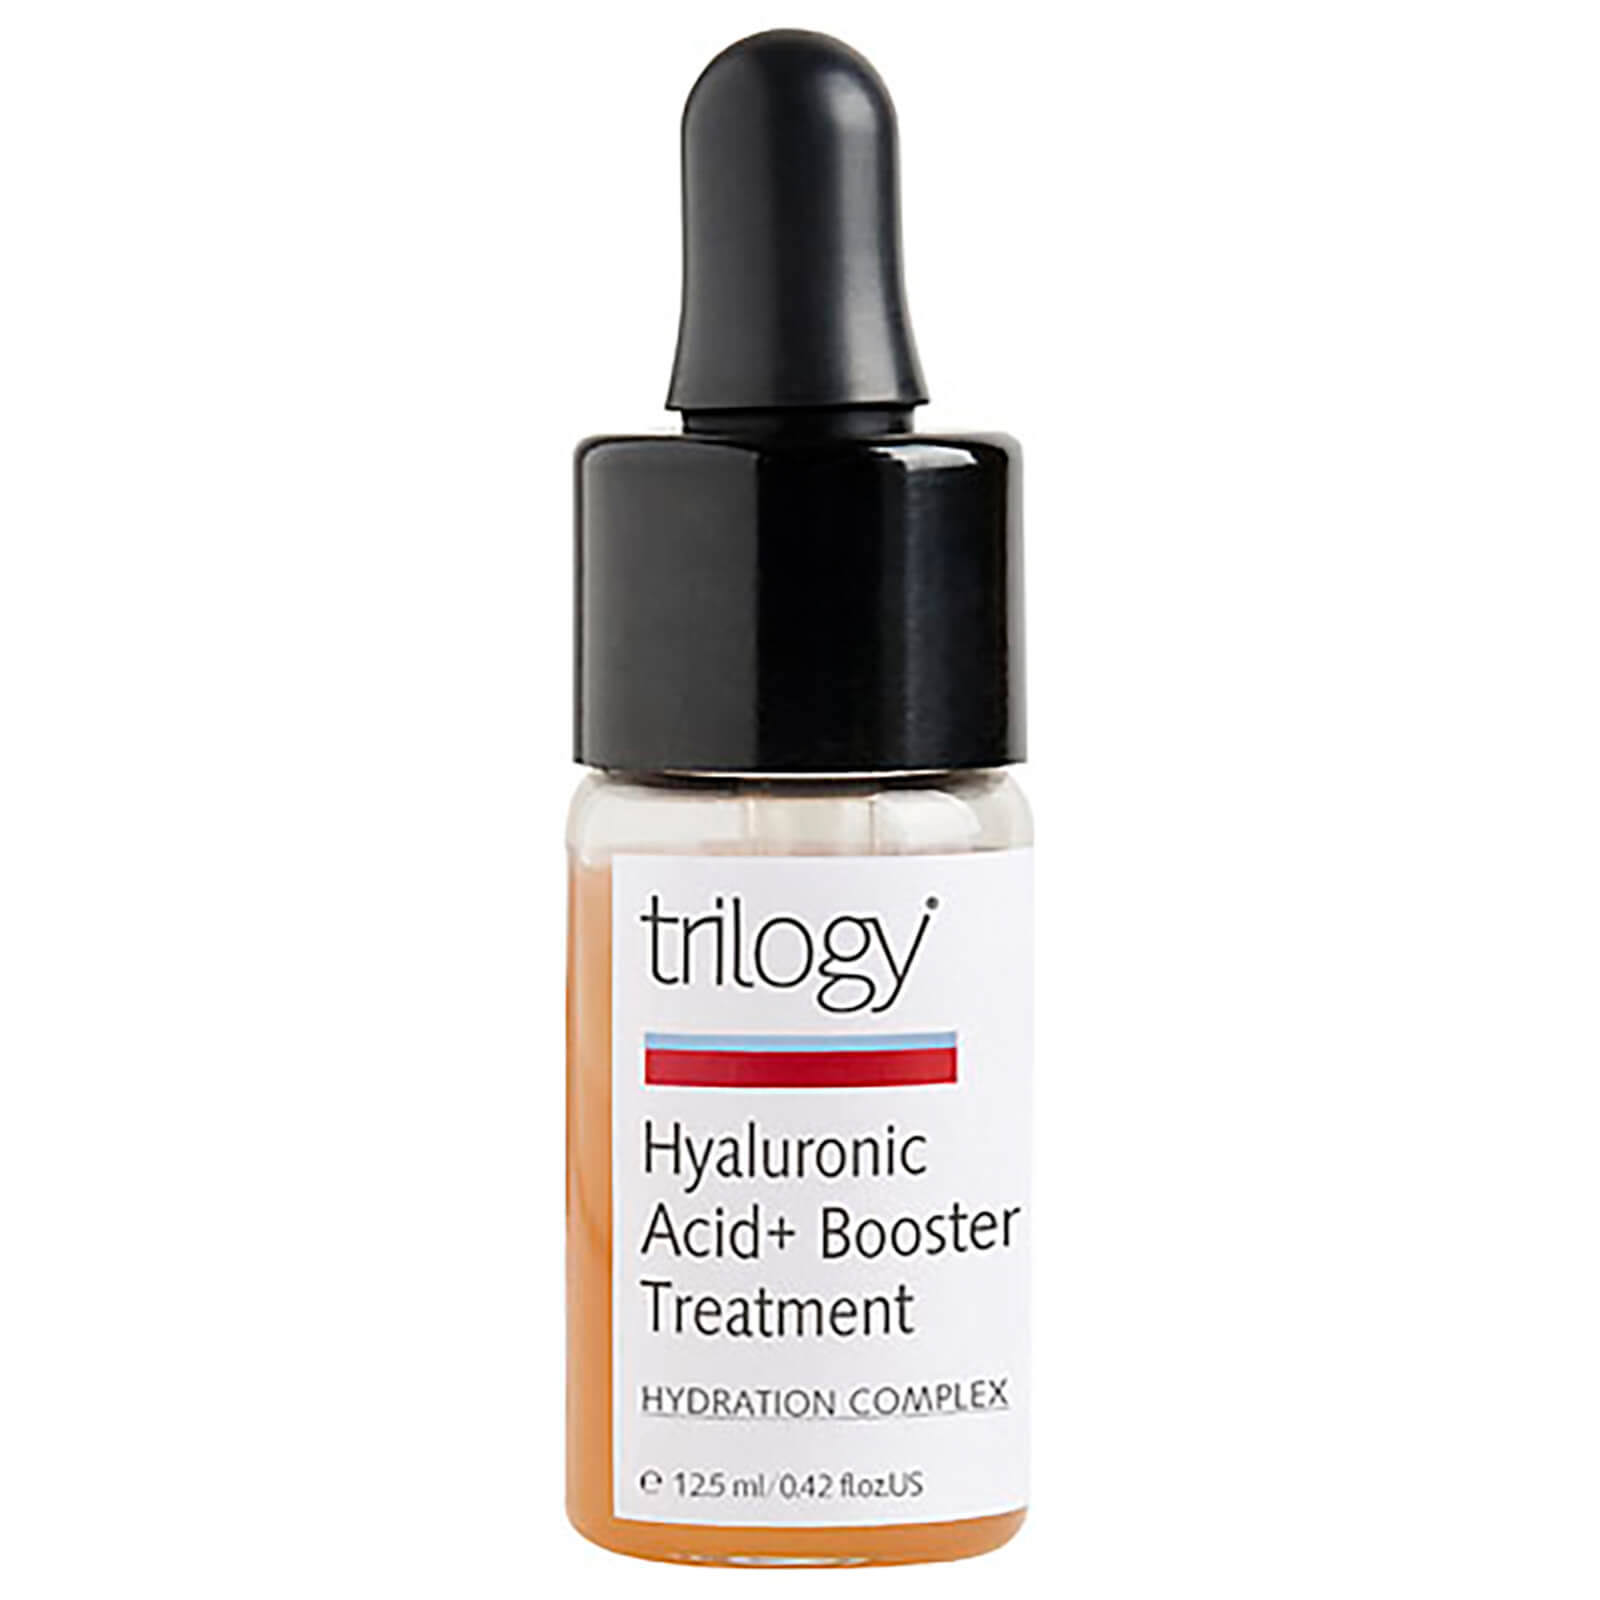 Trilogy - Hyaluronic Acid+ Booster Treatment (FOR Dehydrated/ Dry Skin) 12.5ml/0.42oz